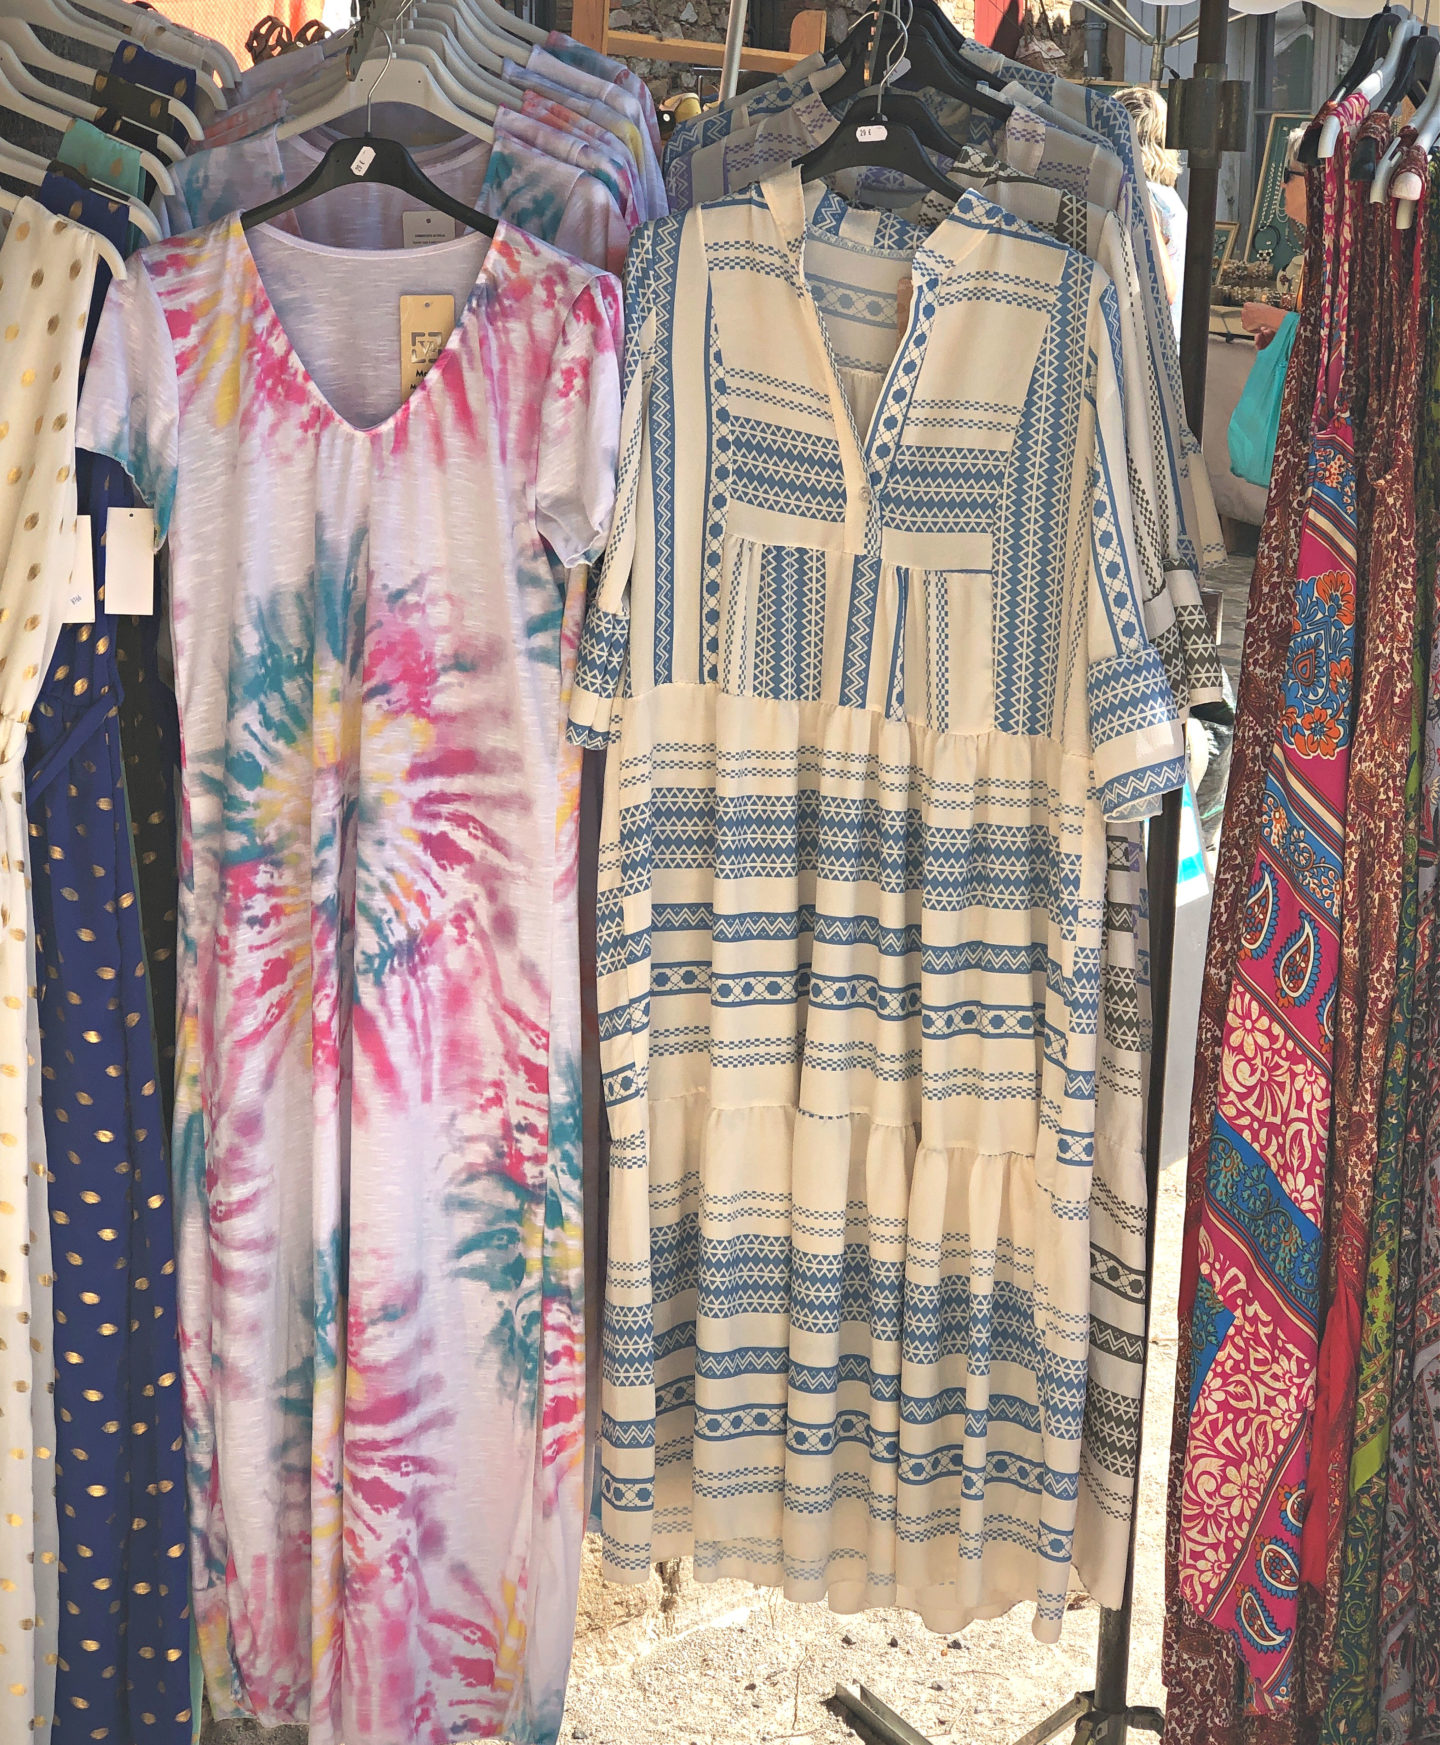 Cool kaftans for high summer - Chic at any age